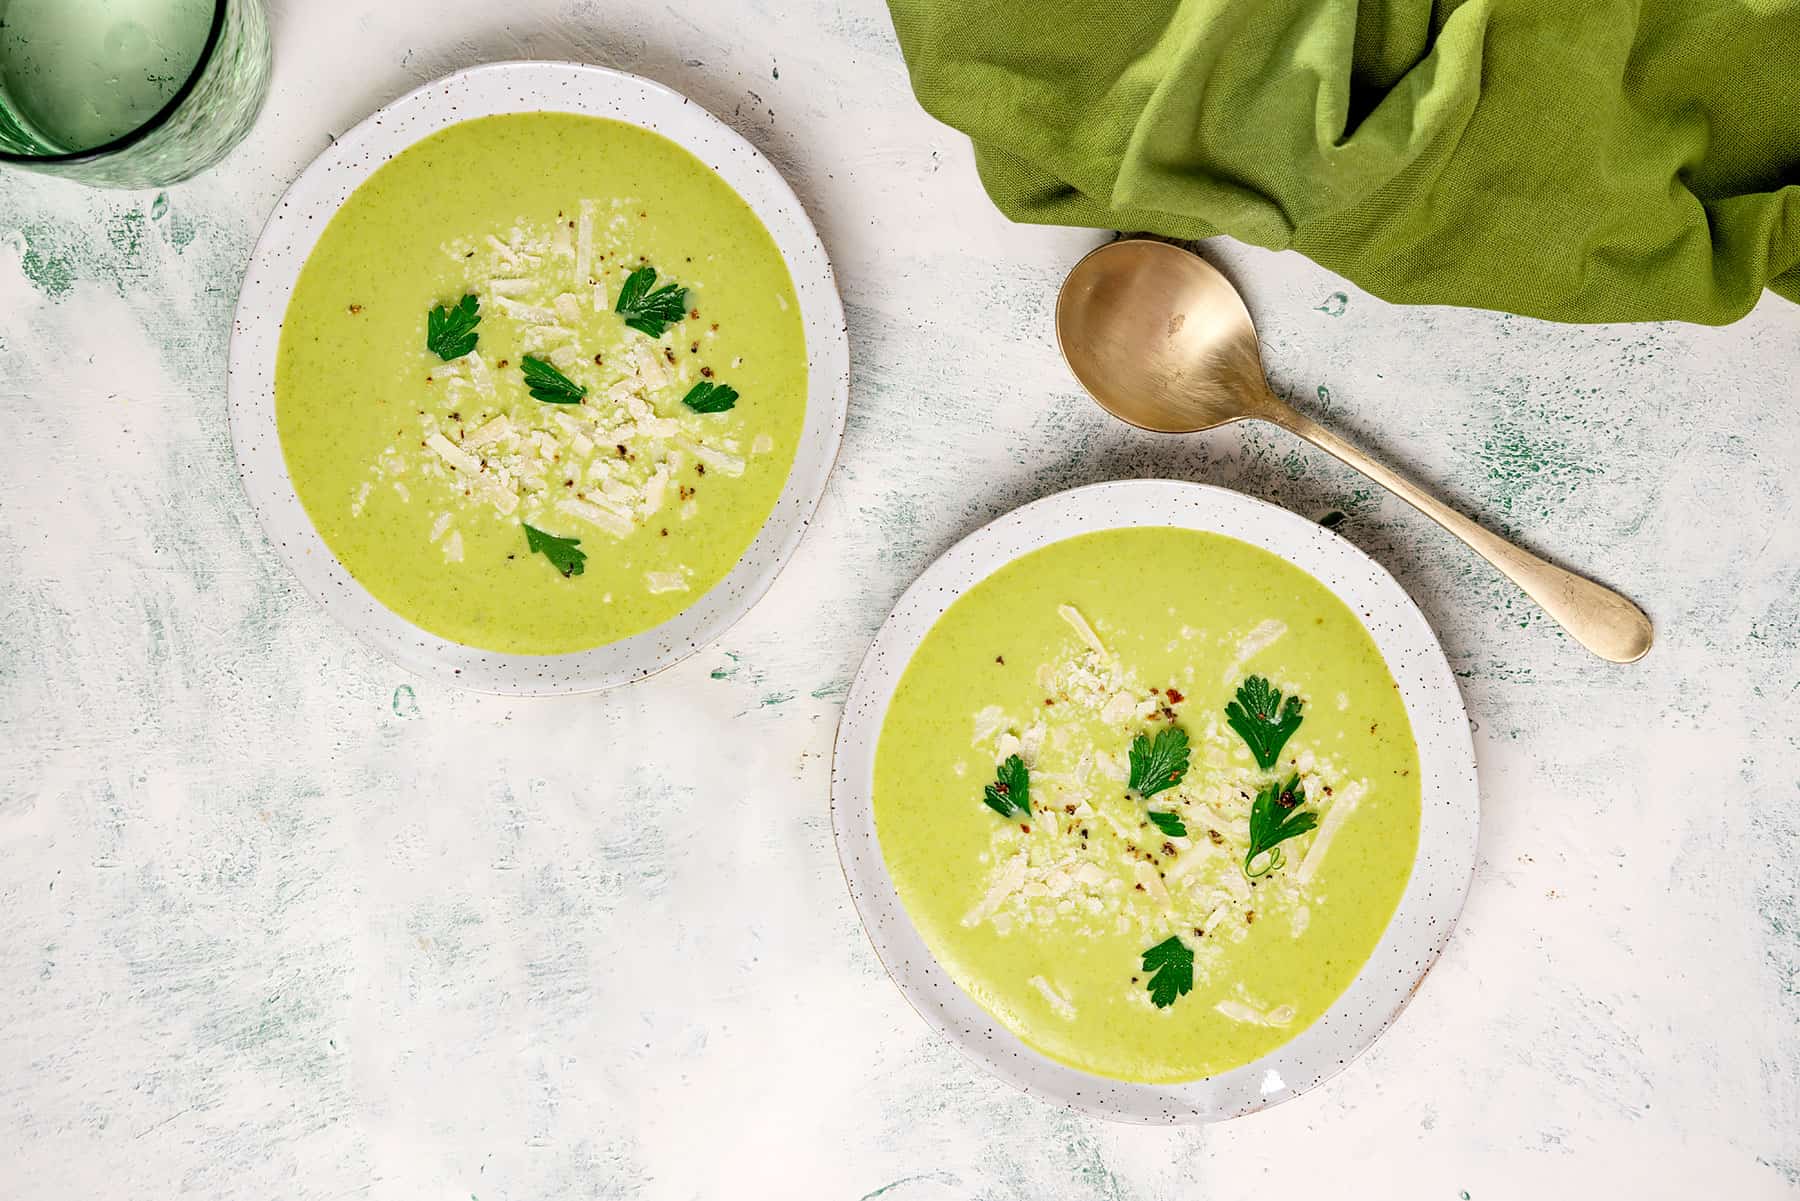 Cream of broccoli soup with cheddar cheese.